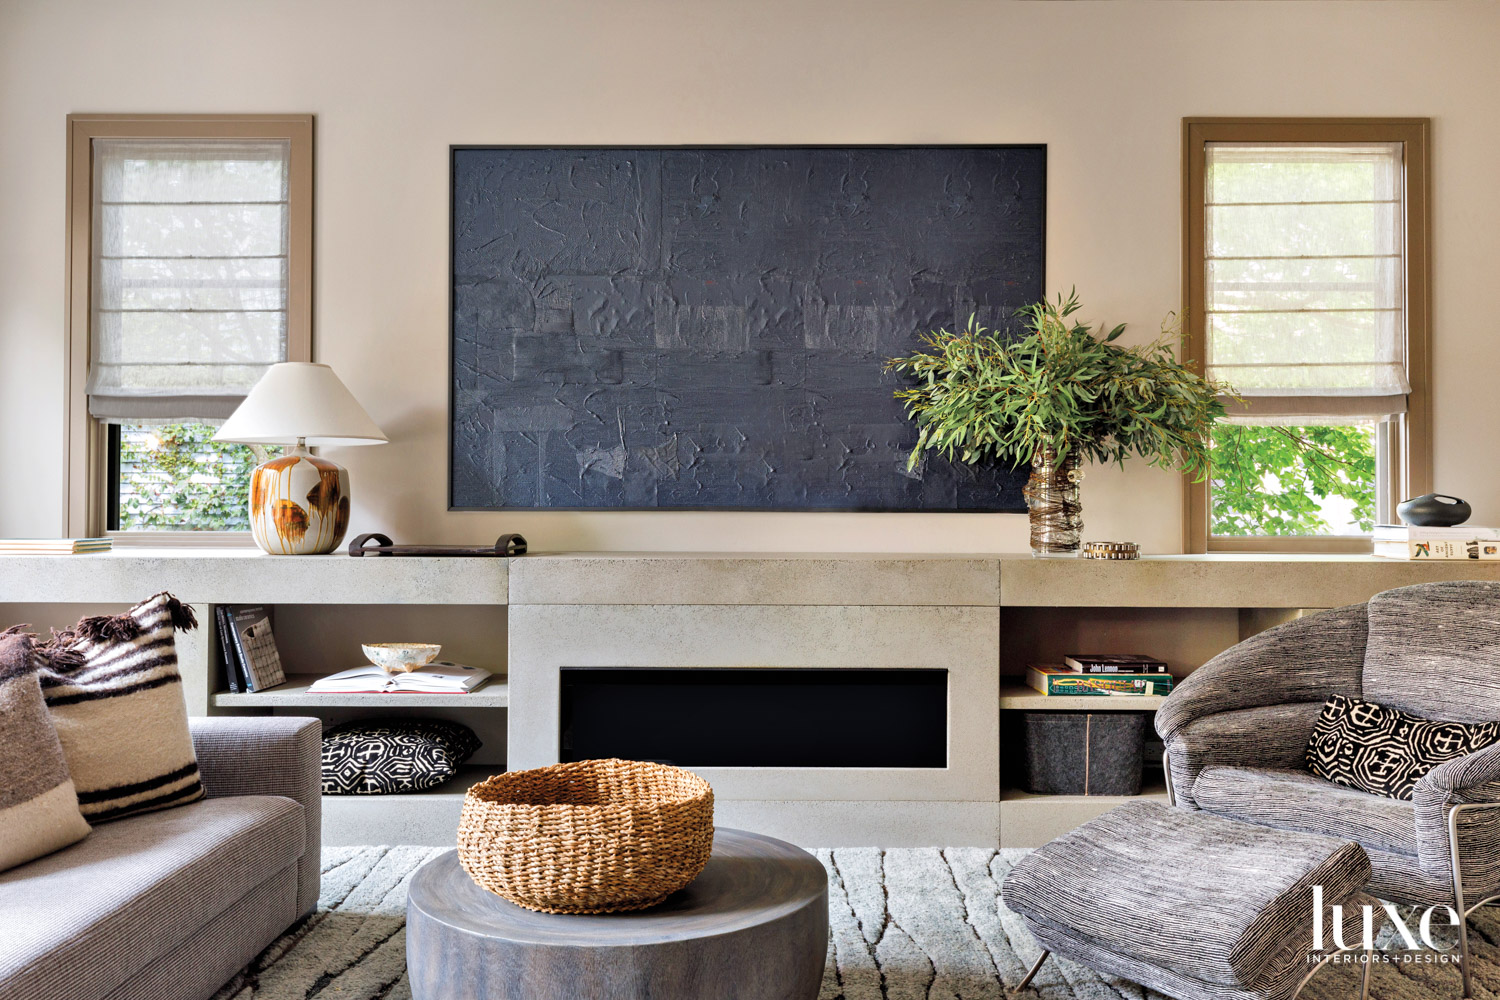 In a neutral living room a black, textured painting hangs above a concrete fireplace.